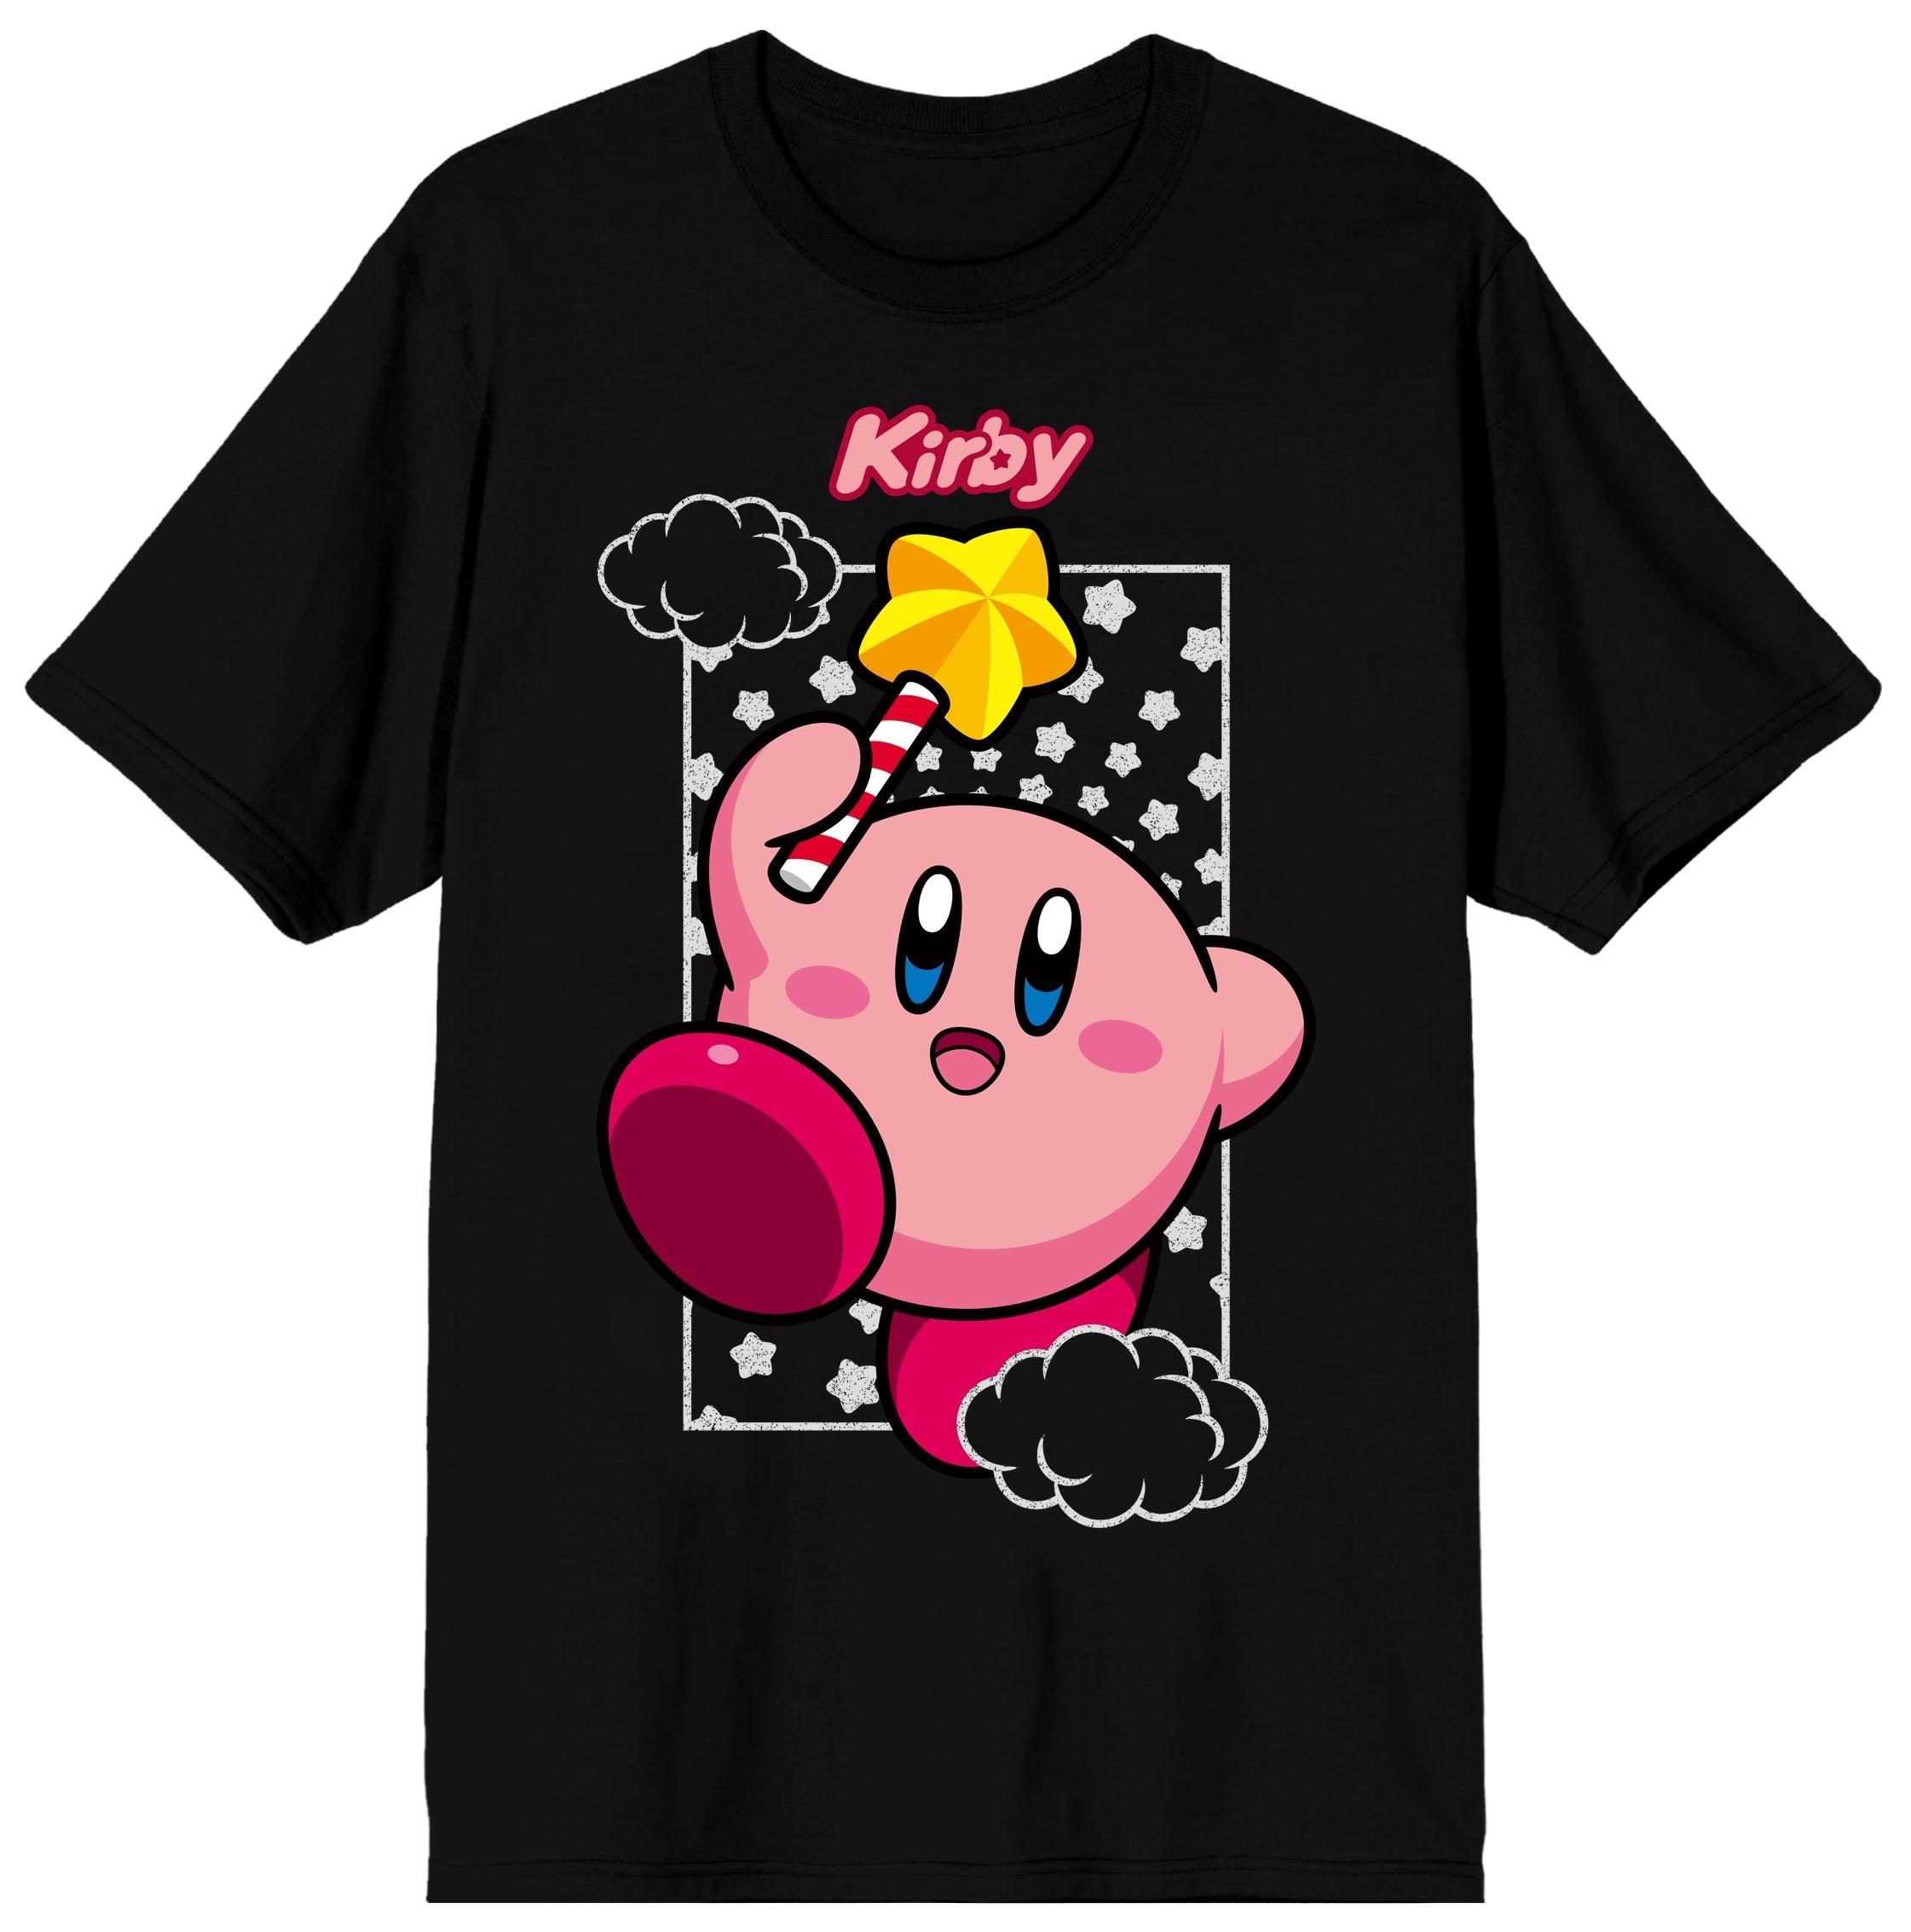 Kirby Character with Stars Pattern Men's Black Short Sleeve Graphic T-Shirt